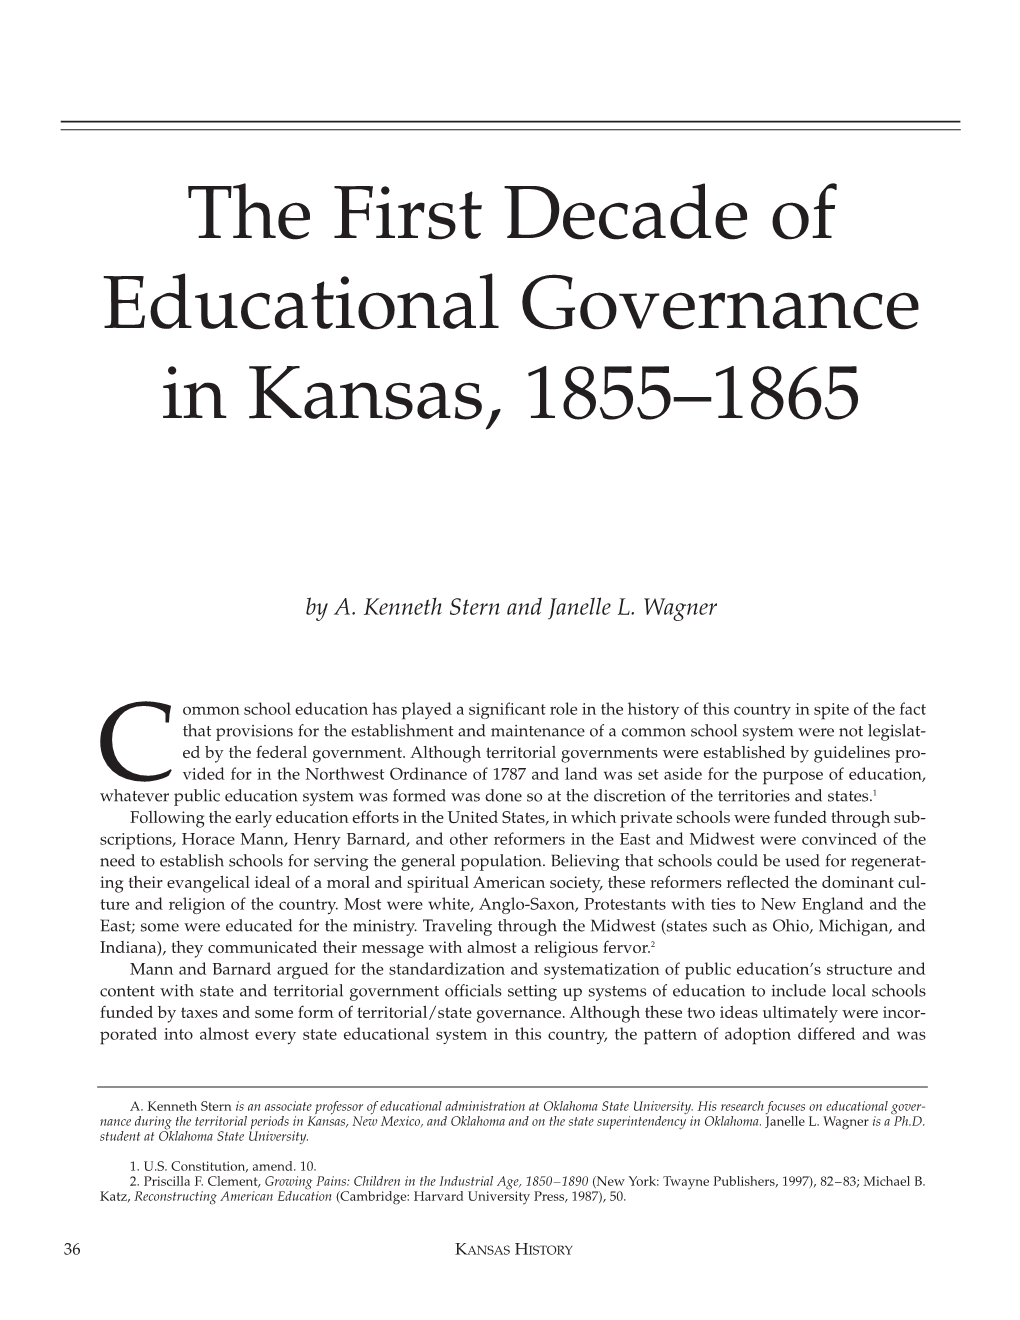 The First Decade of Educational Governance in Kansas, 1855–1865